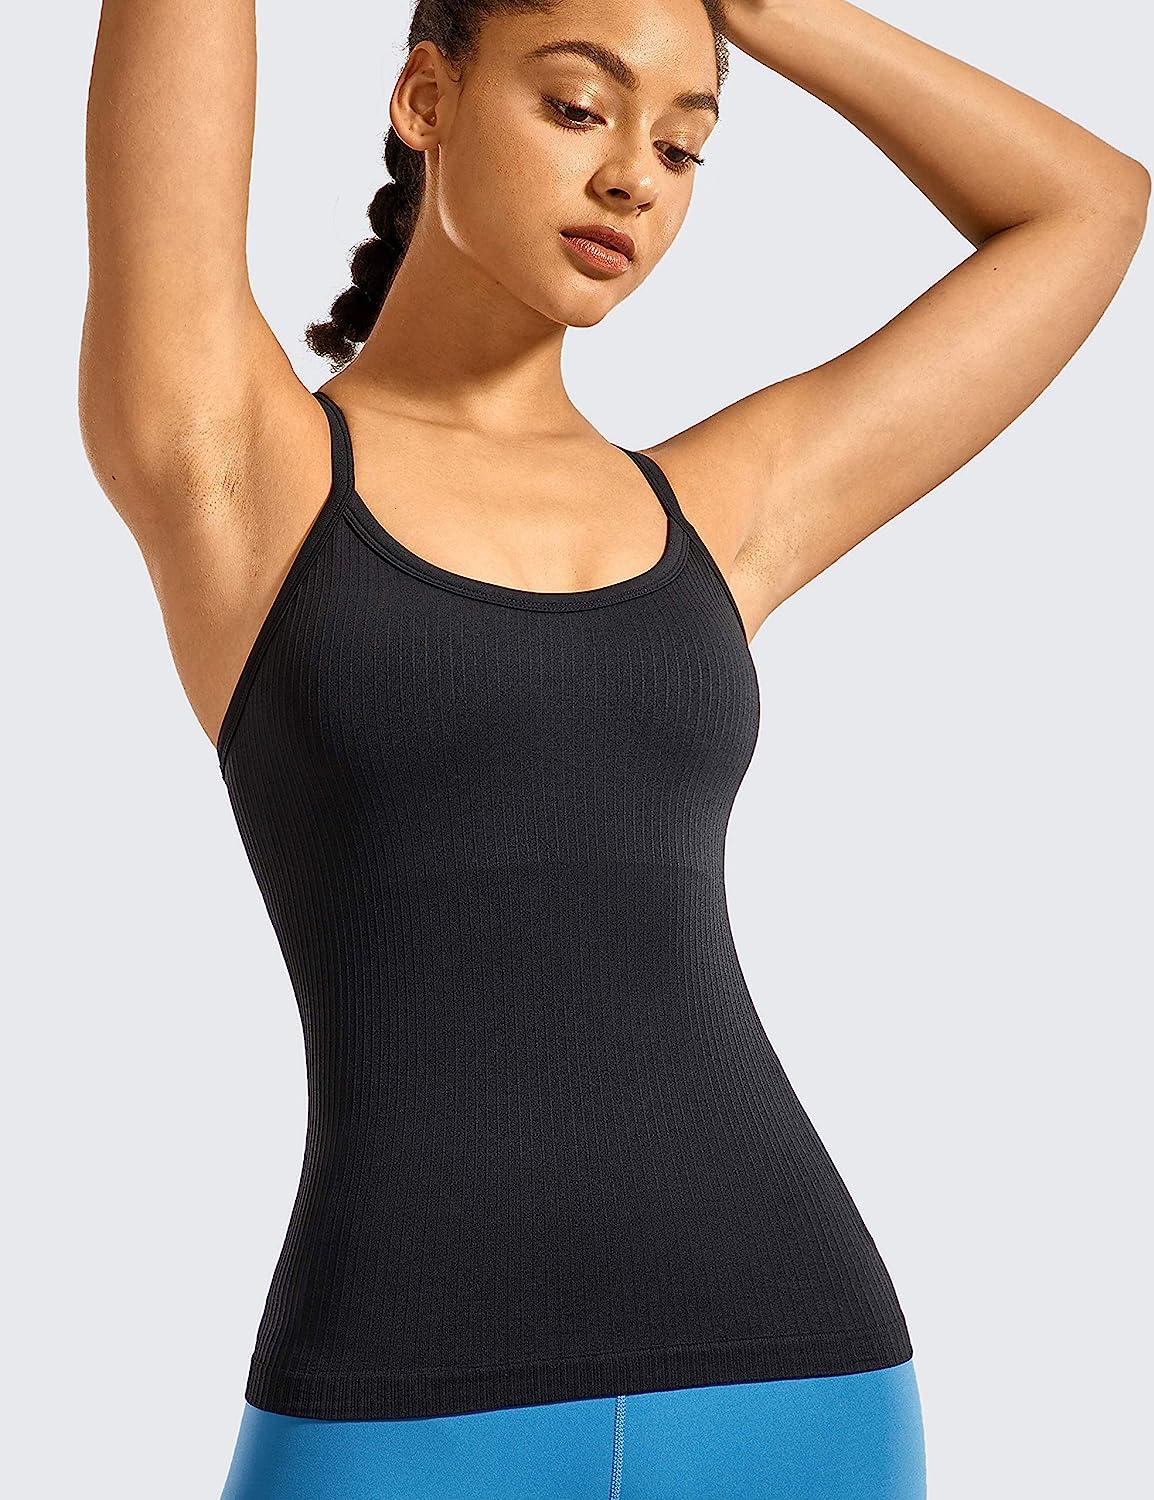 CRZ YOGA Seamless Workout Tank Tops for Women Racerback Athletic Camisole  Sports Shirts with Built in